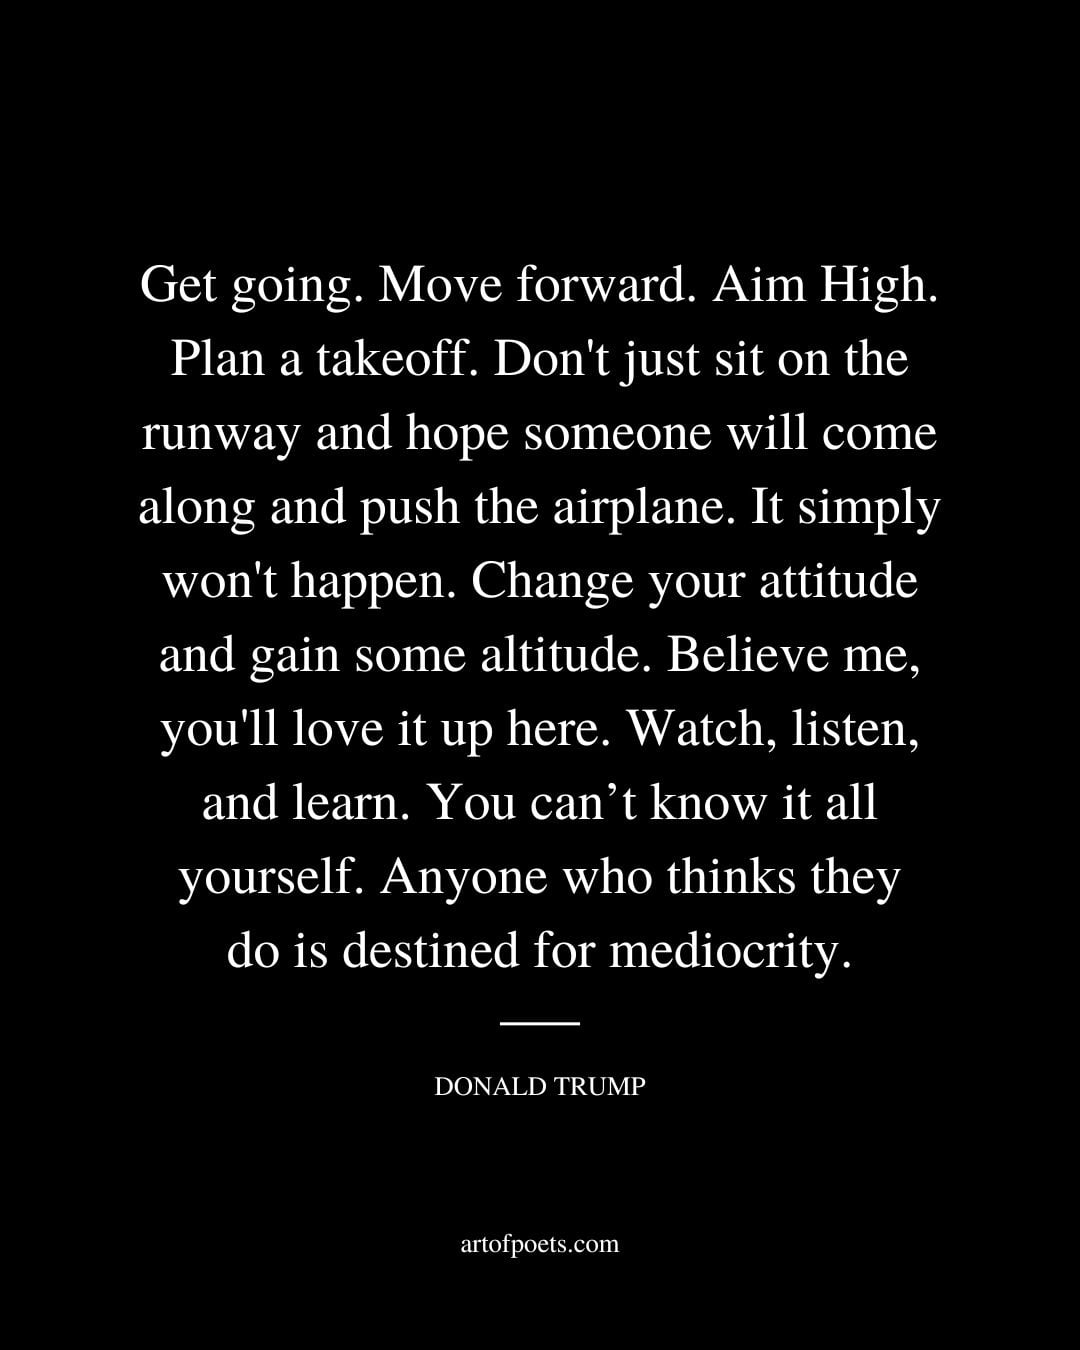 Get going. Move forward. Aim High. Plan a takeoff. Dont just sit on the runway and hope someone will come along and push the airplane